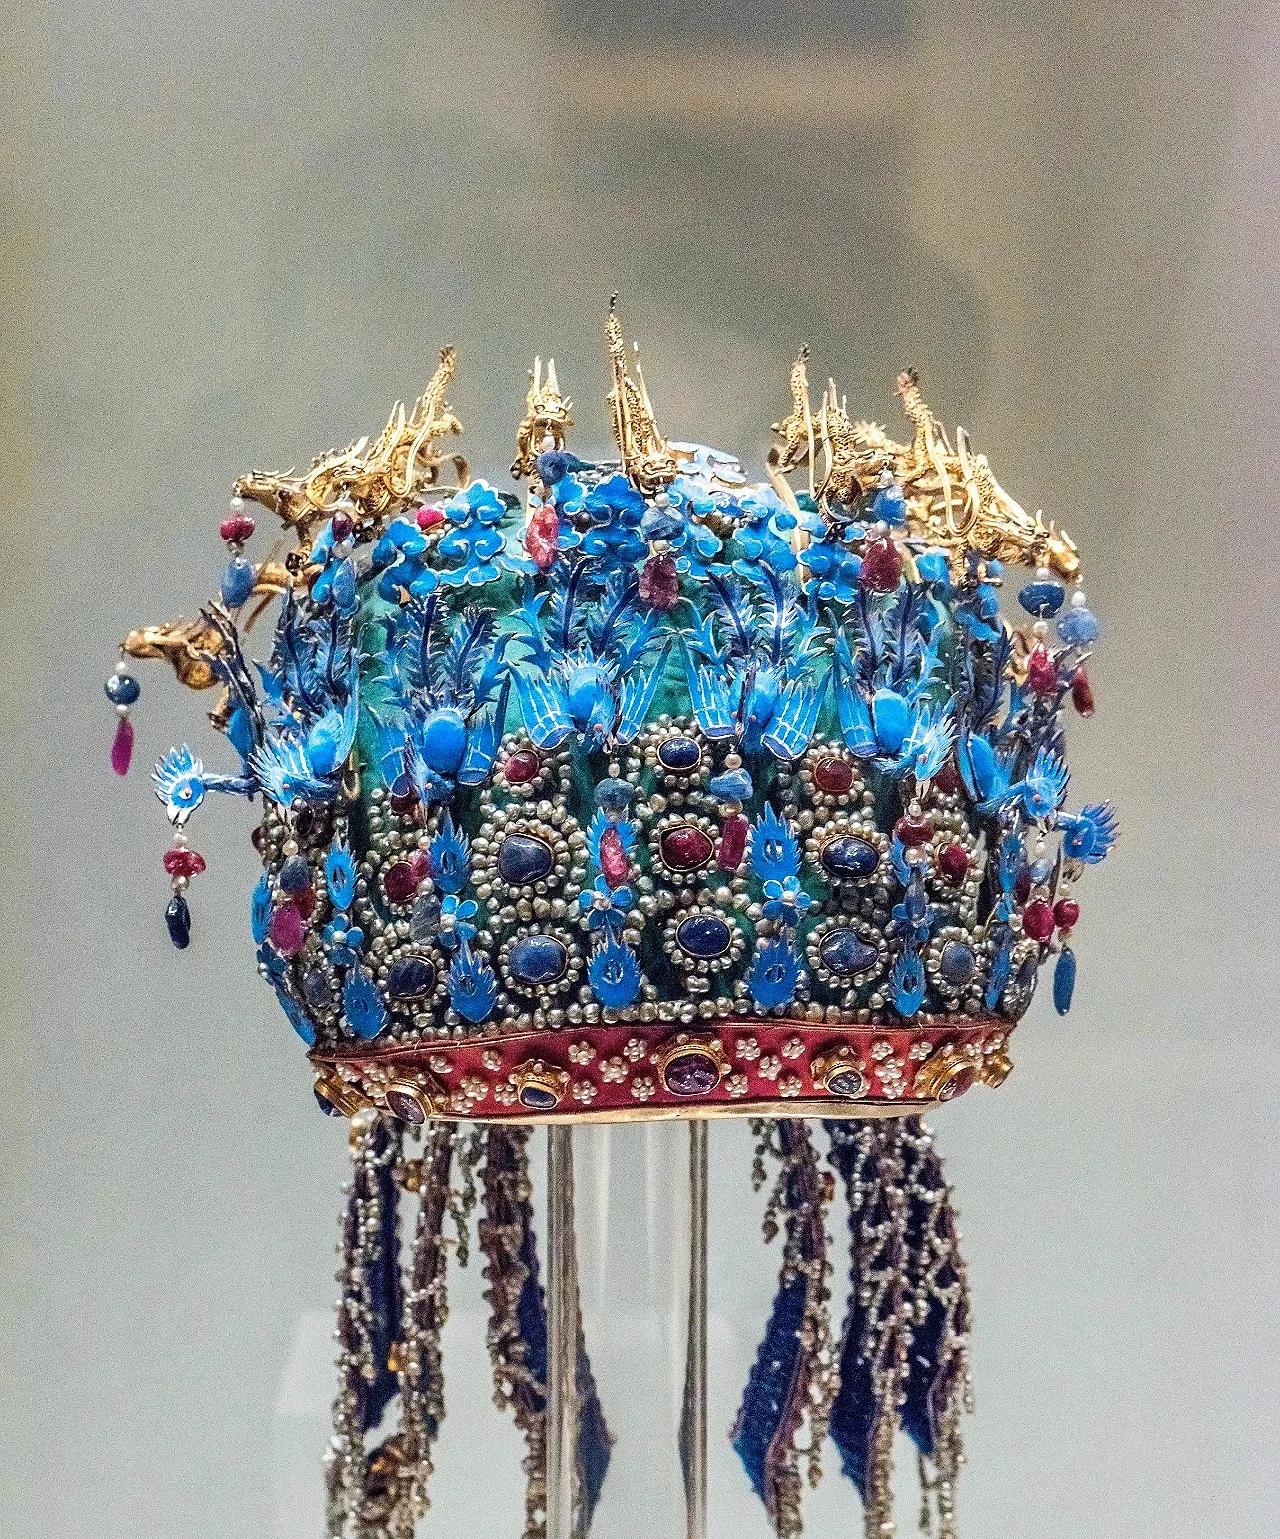 Phoenix crown worn by the Ming Dynasty Empress Xiaoduan. She was the wife  of Emperor Wanli who reigned from 1573 to 1620. The e…